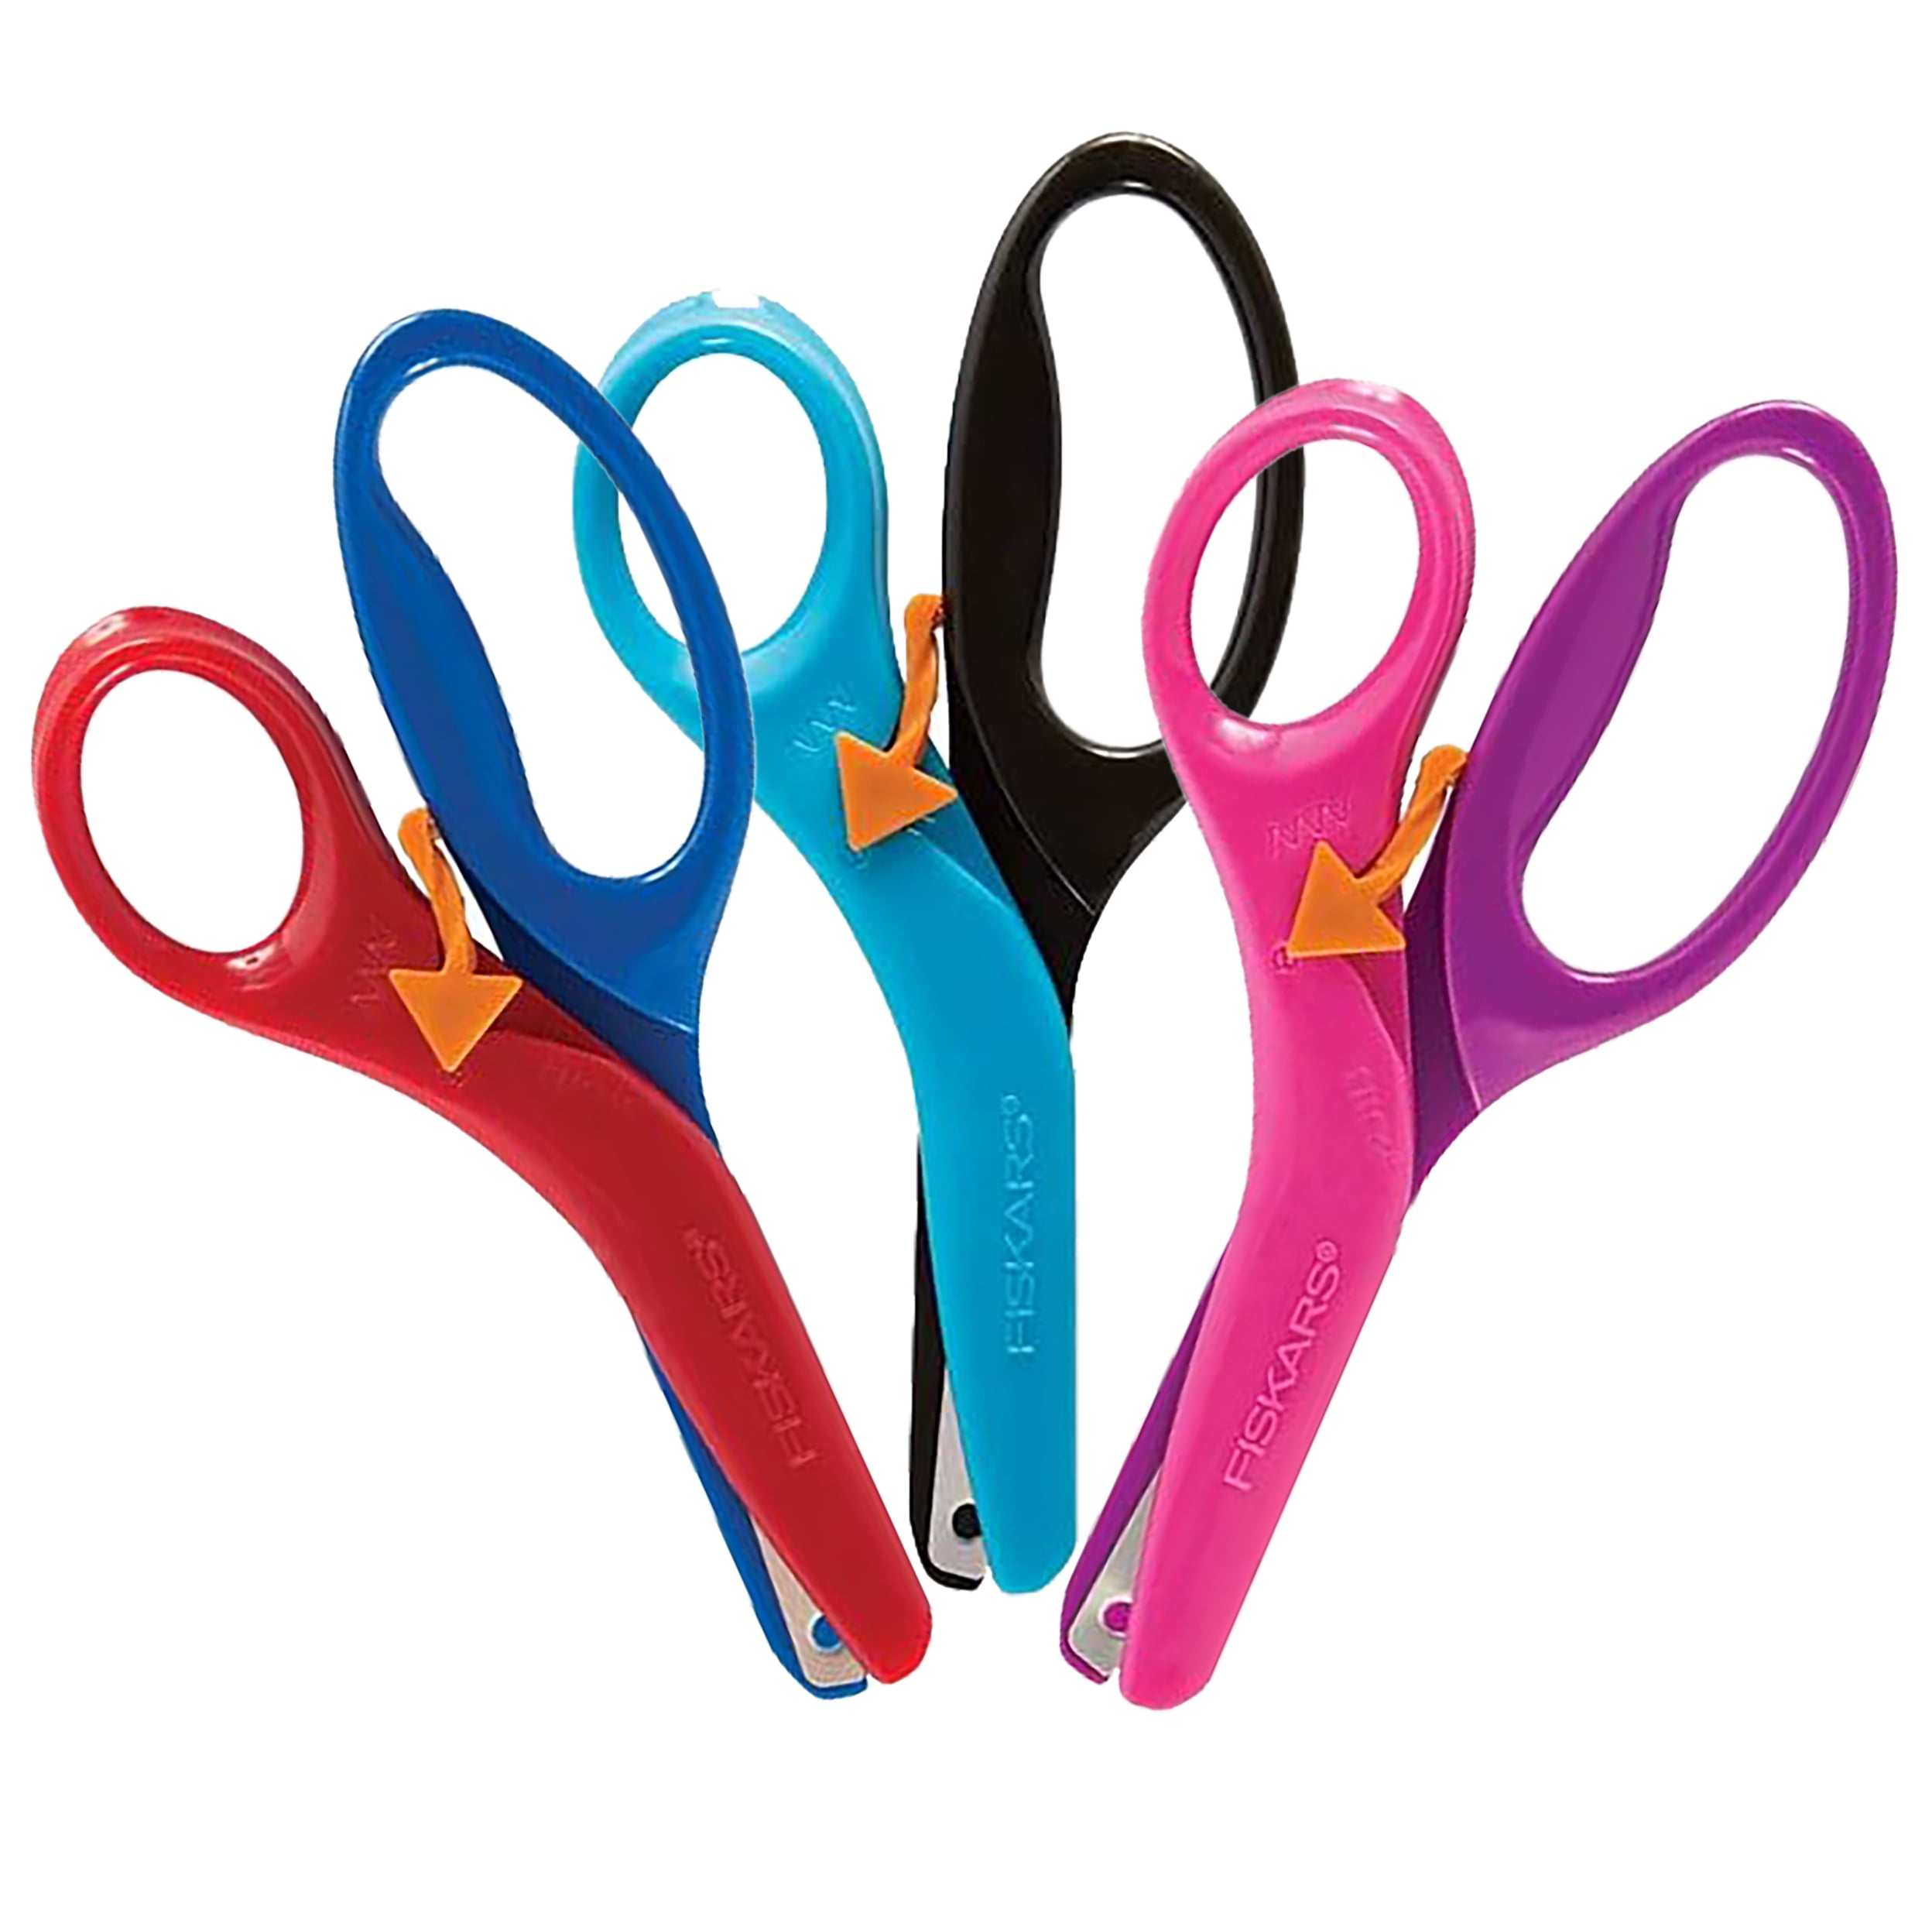  Fiskars Training Scissors for Kids 3+ with Easy Grip (6-Pack) - Toddler  Safety Scissors for School or Crafting - Back to School Supplies